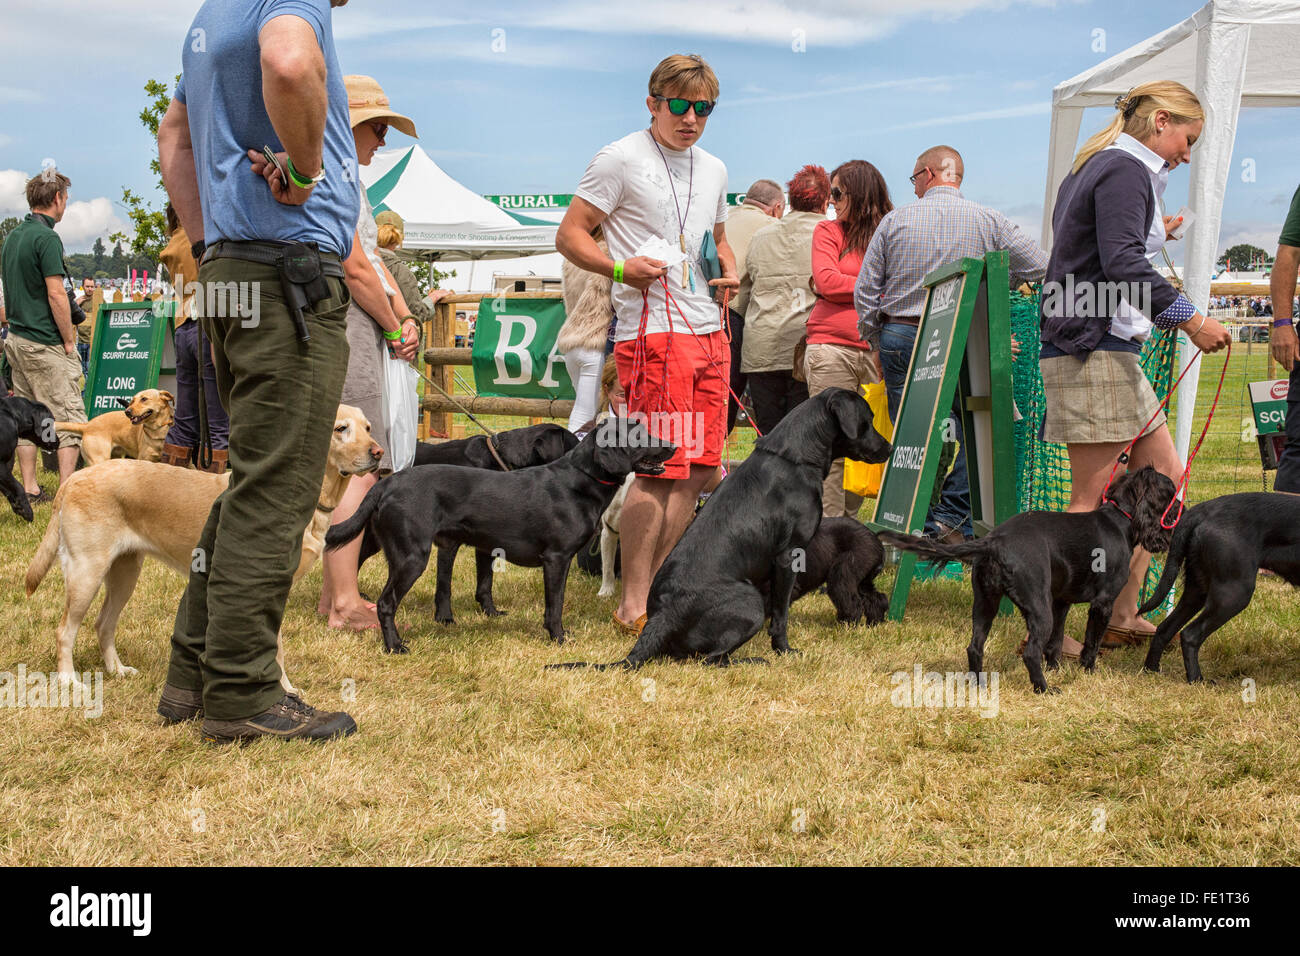 Dogs waiting for a scurry at a fair at Harewood House in Yorkshire, UK Stock Photo